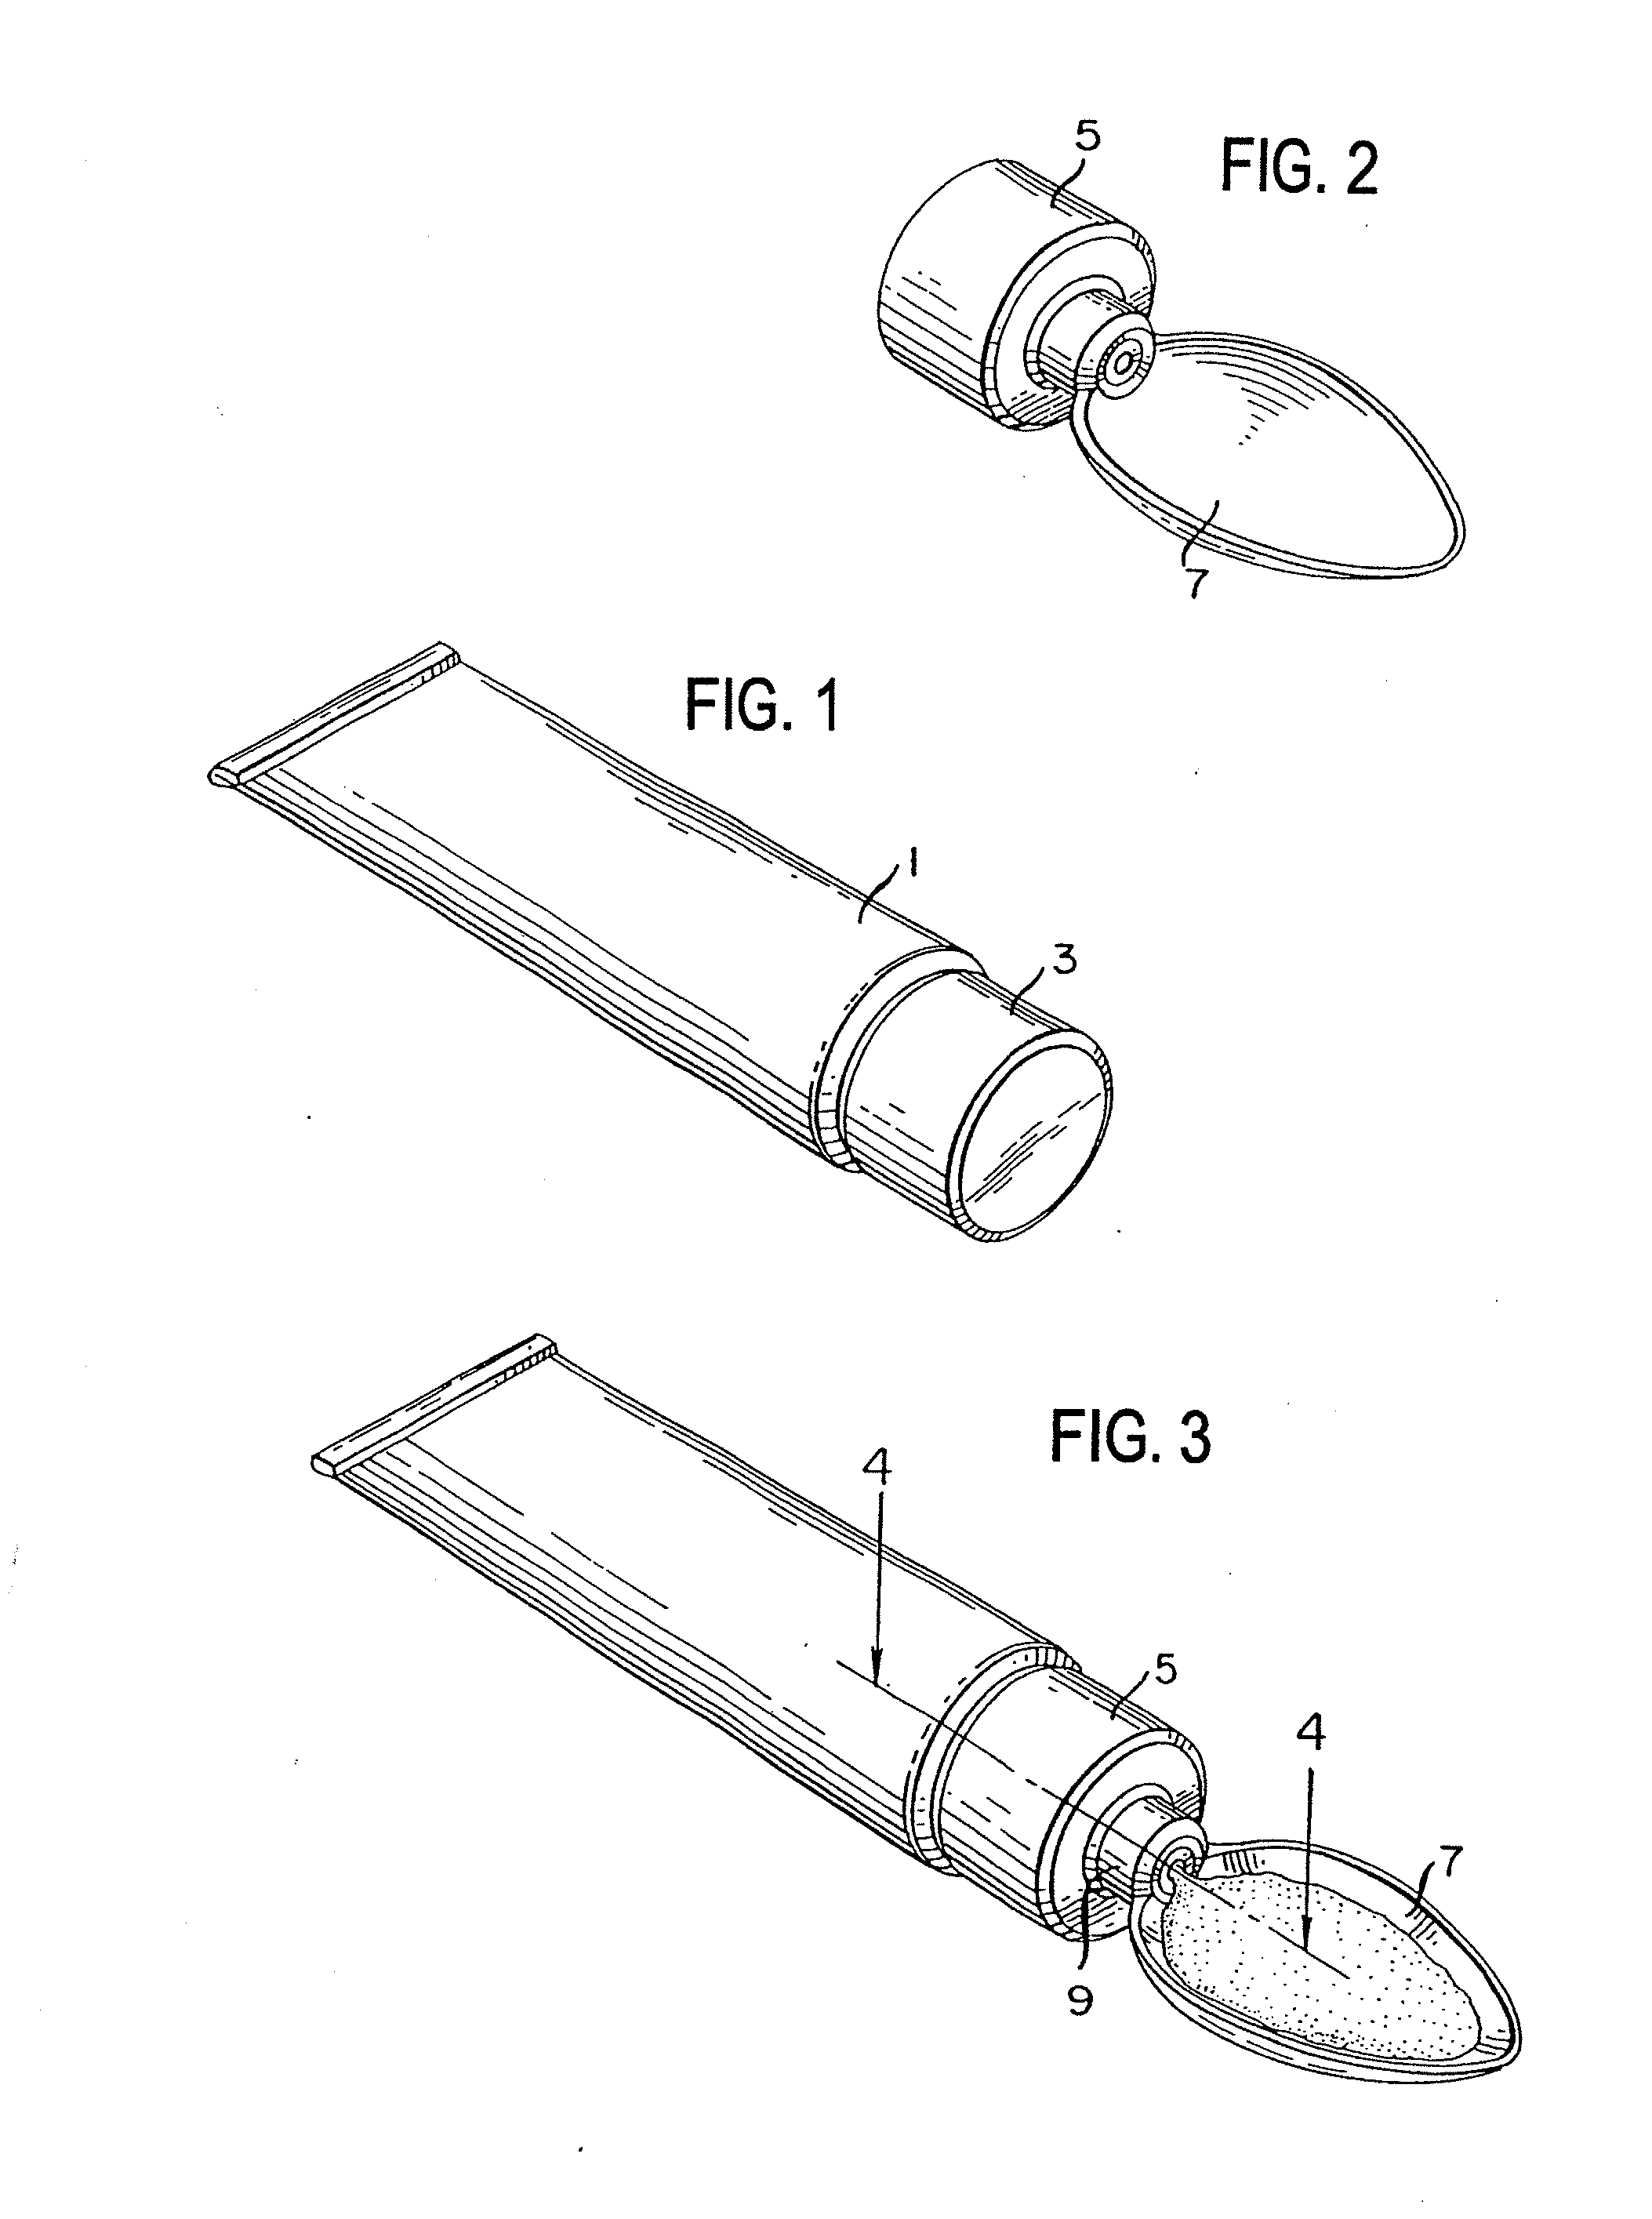 Method for administering a spill resistant pharmaceutical system